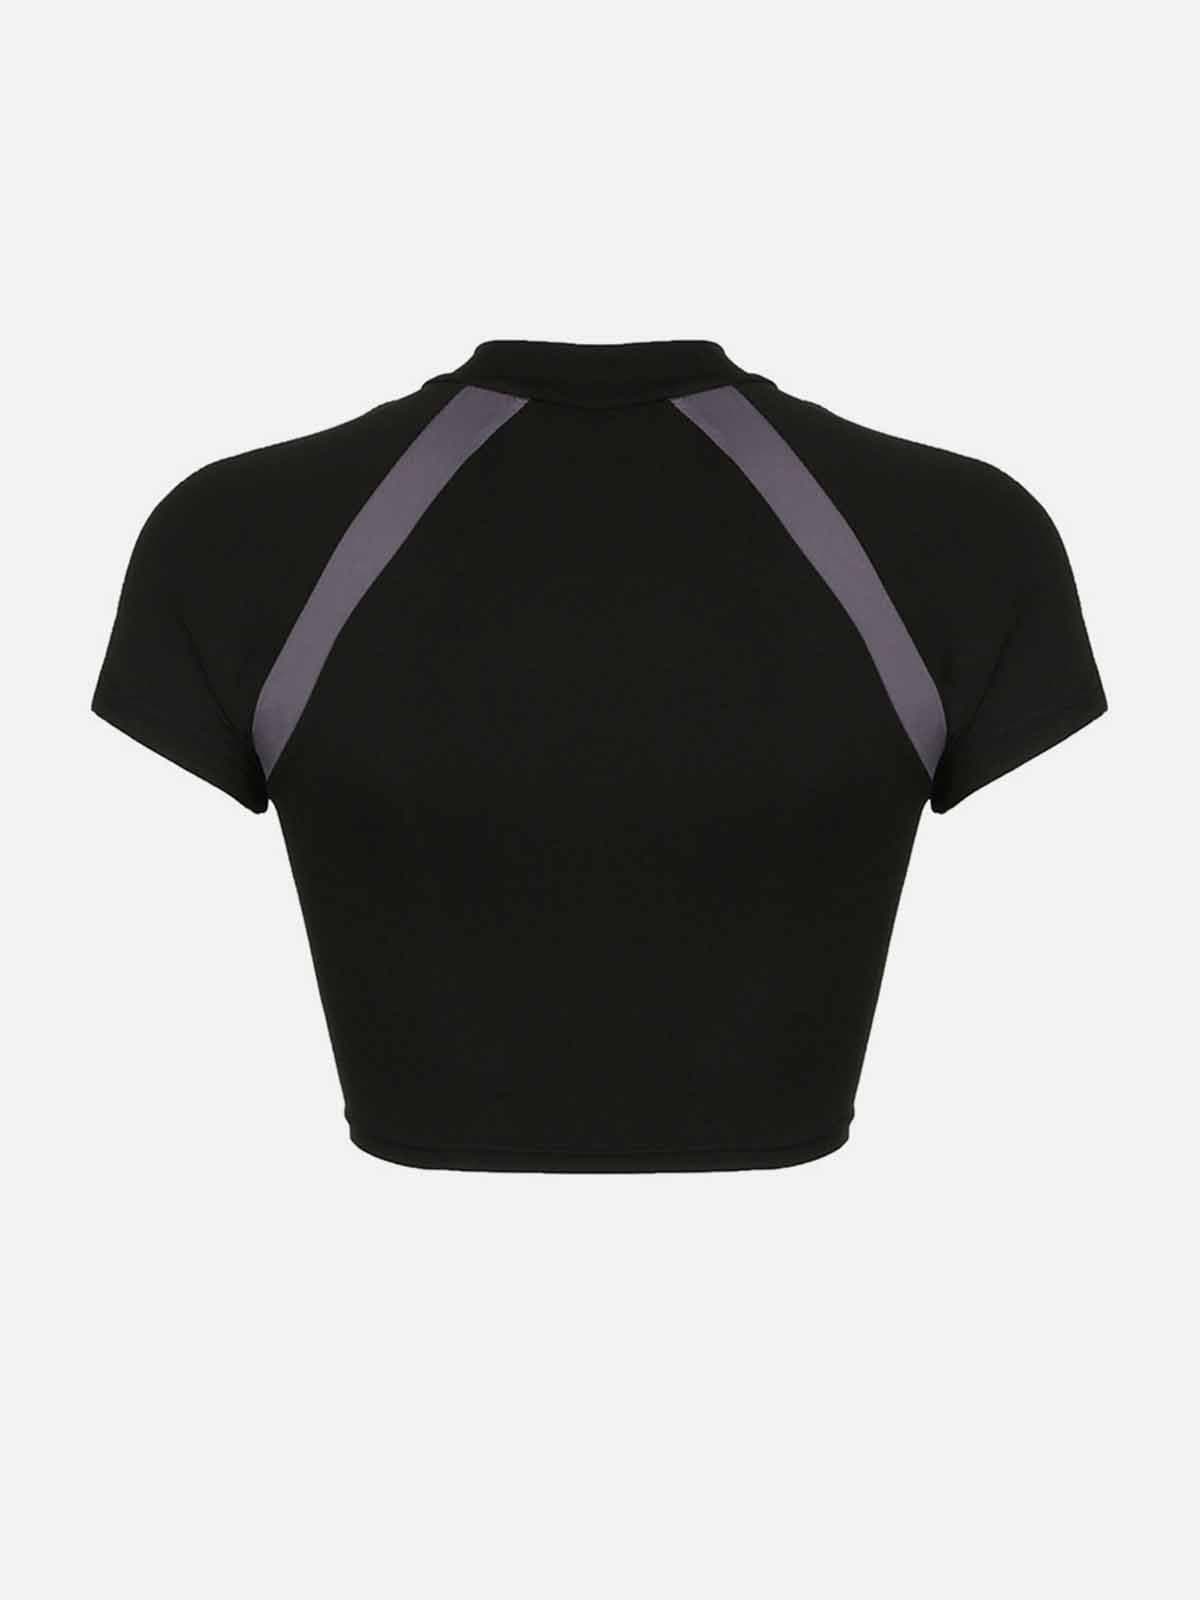 NEV Motorcycle Style Stand-Up Collar Tee